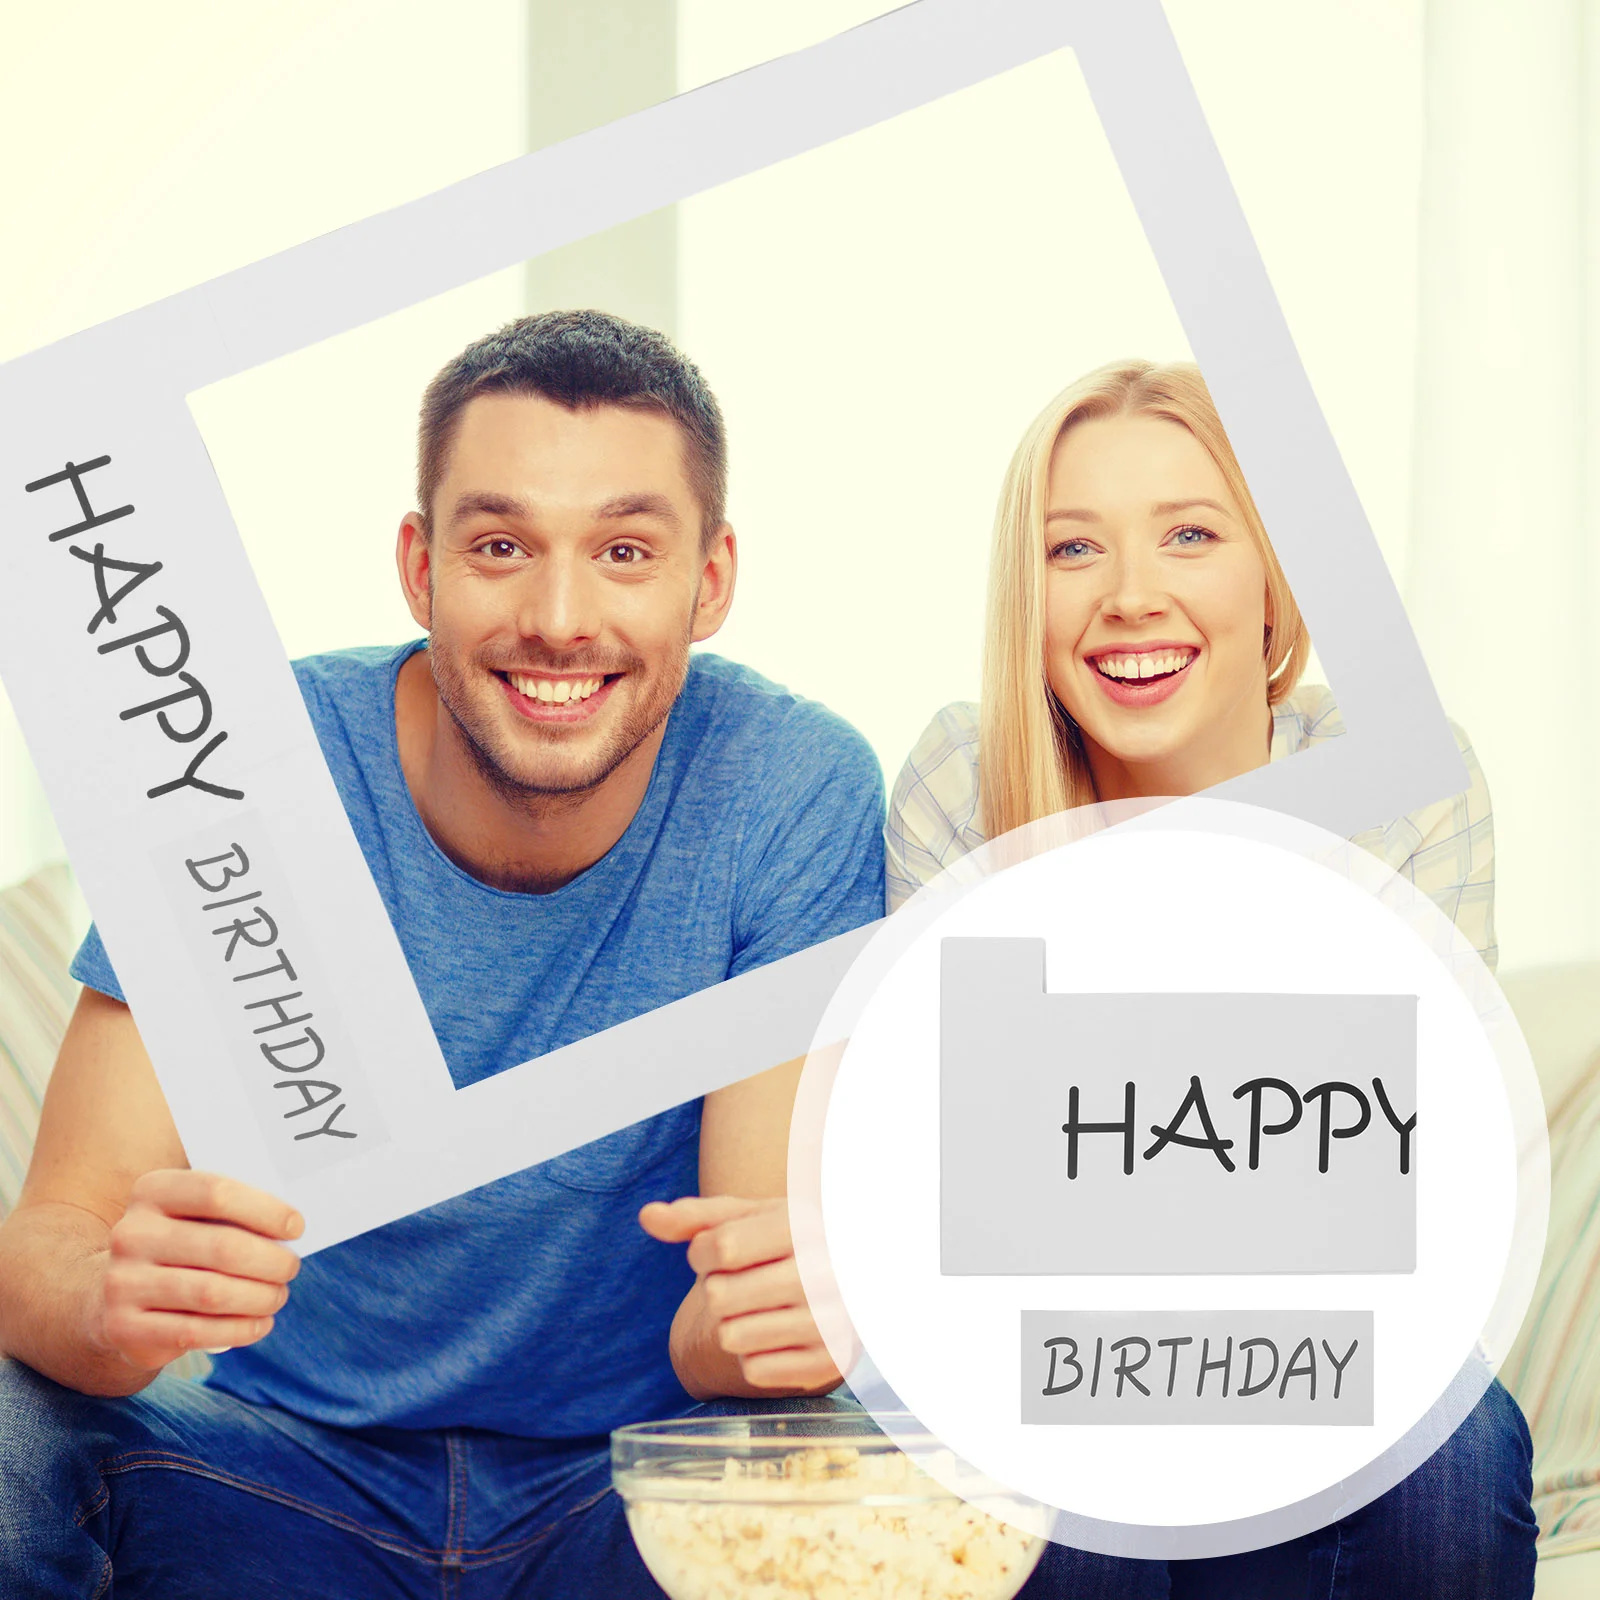 

Happy Birthday Photo Frame Paper Pictures Birthday Anniversary Cutouts Booth Props DIY Party Supplies Decoration Favors